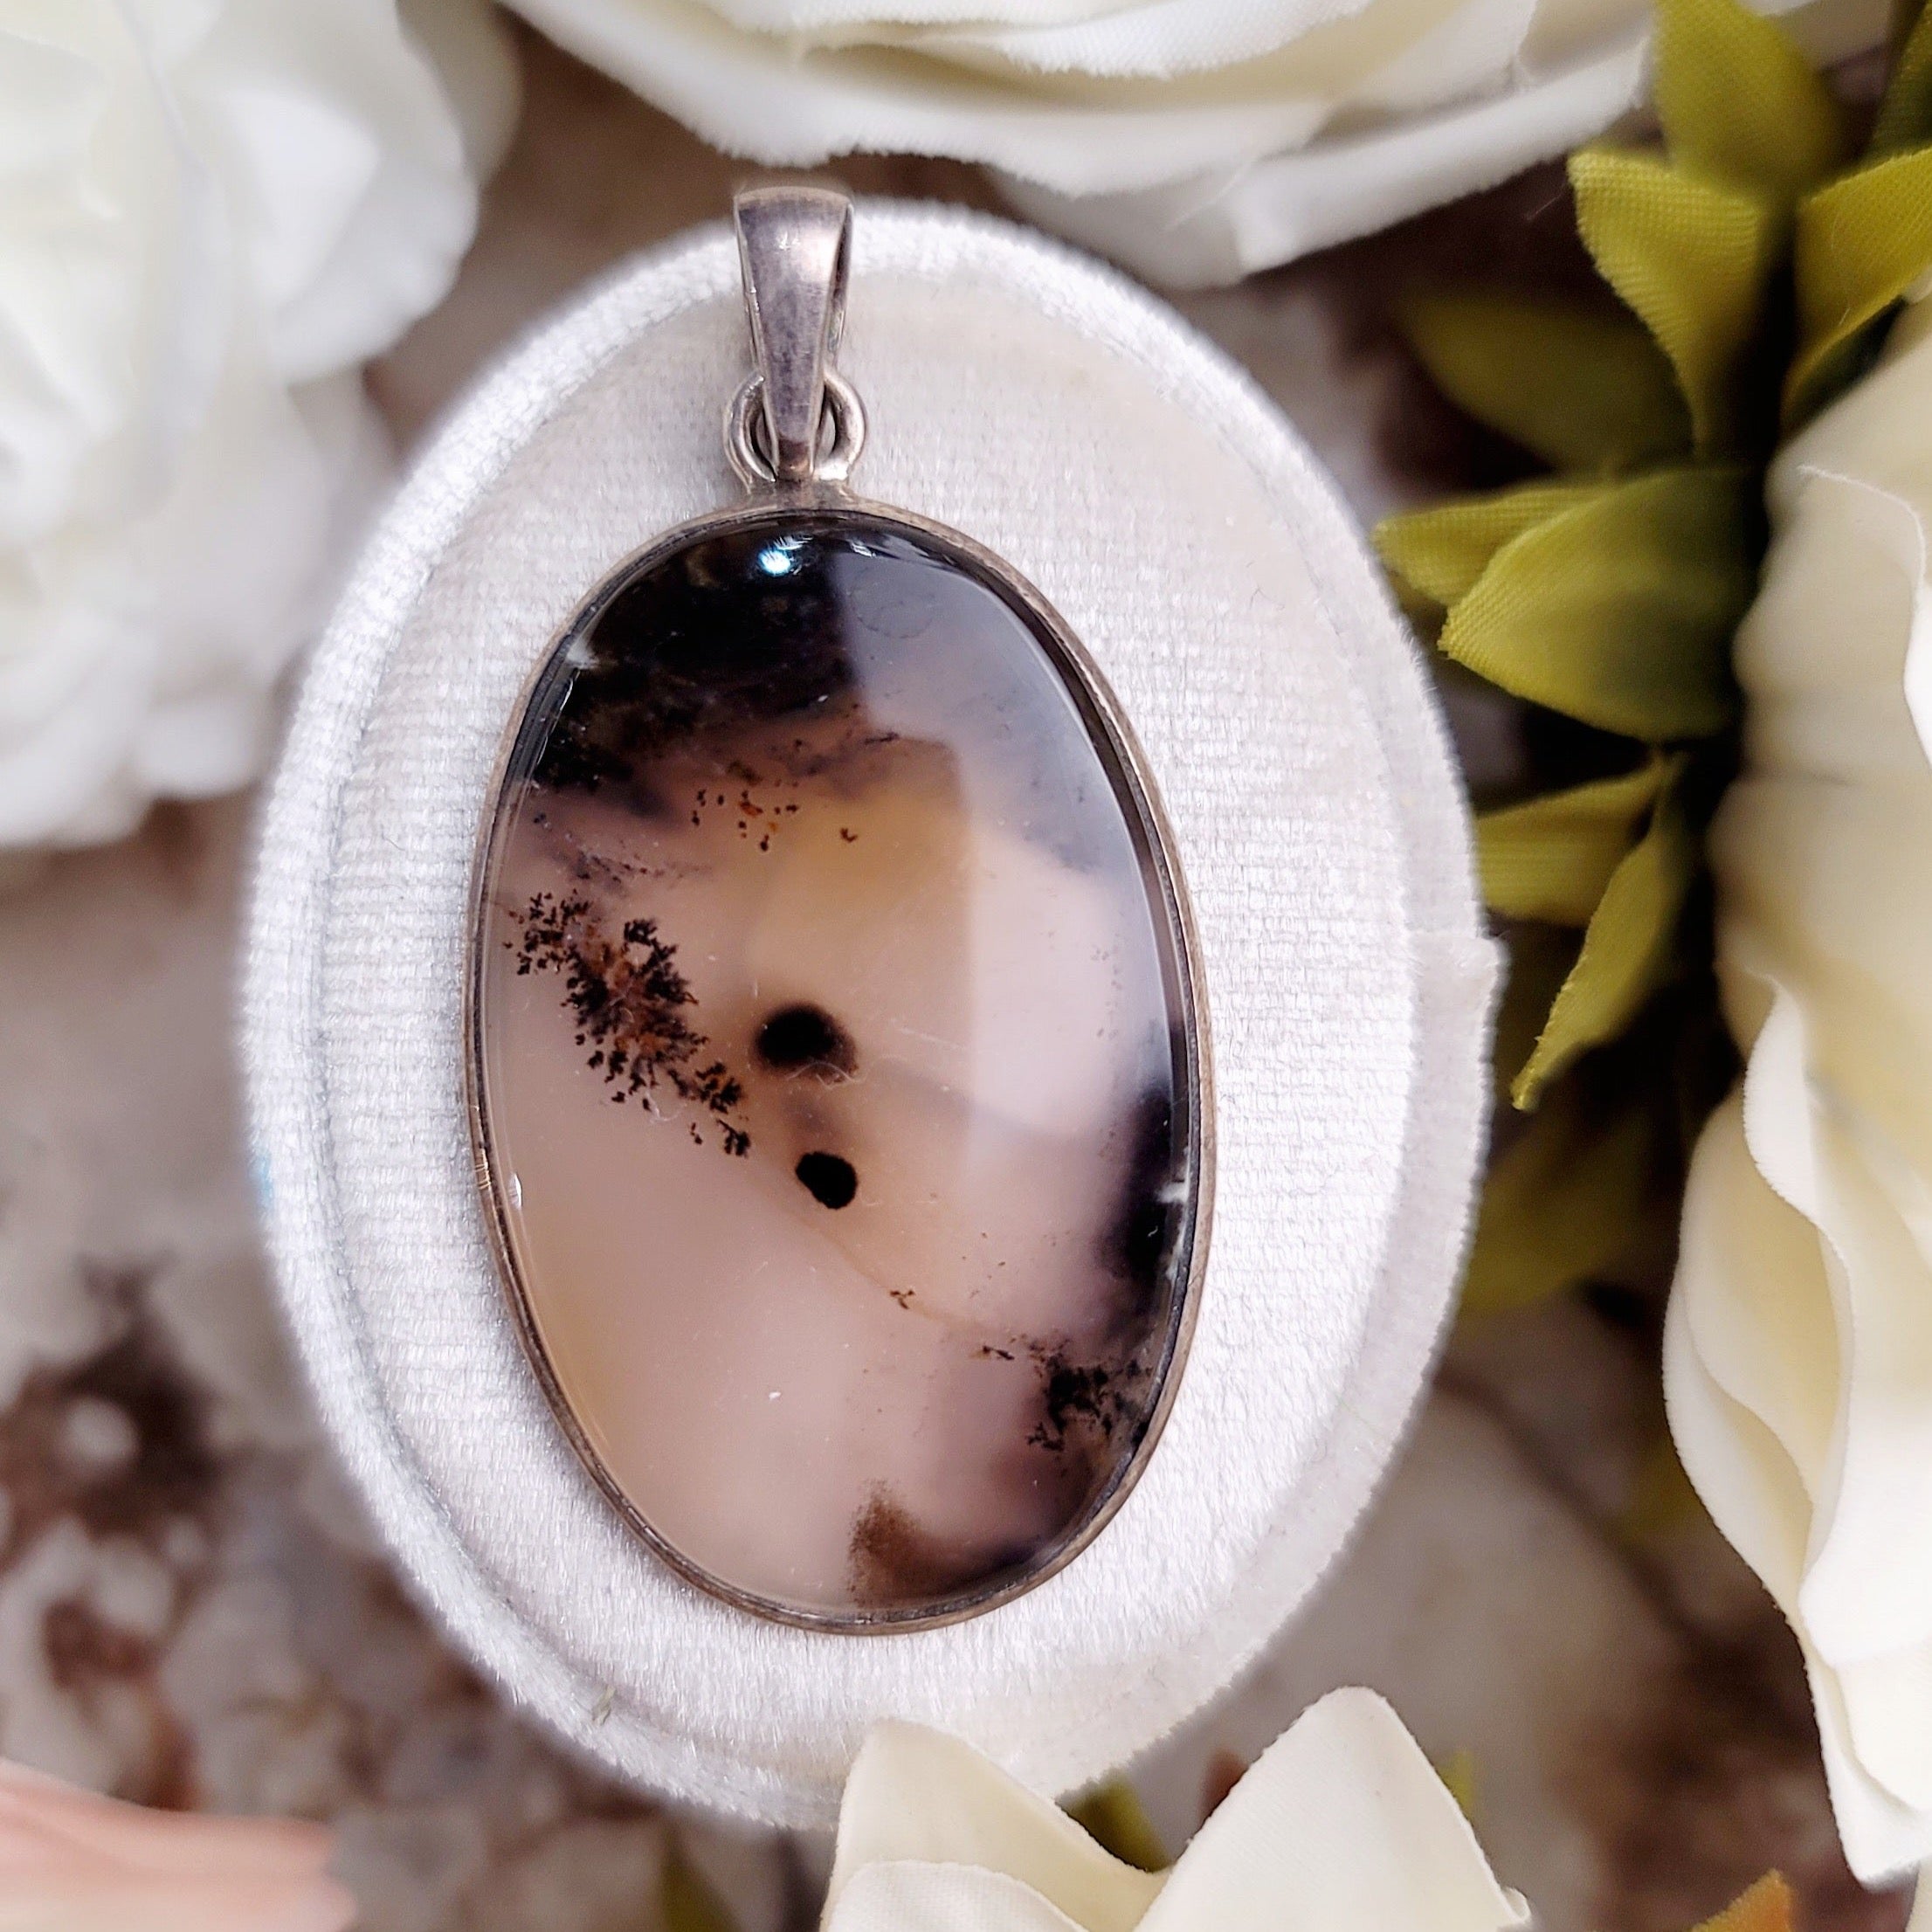 Montana Dendritic Agate Pendant for Growth and Positive Behavior Changes